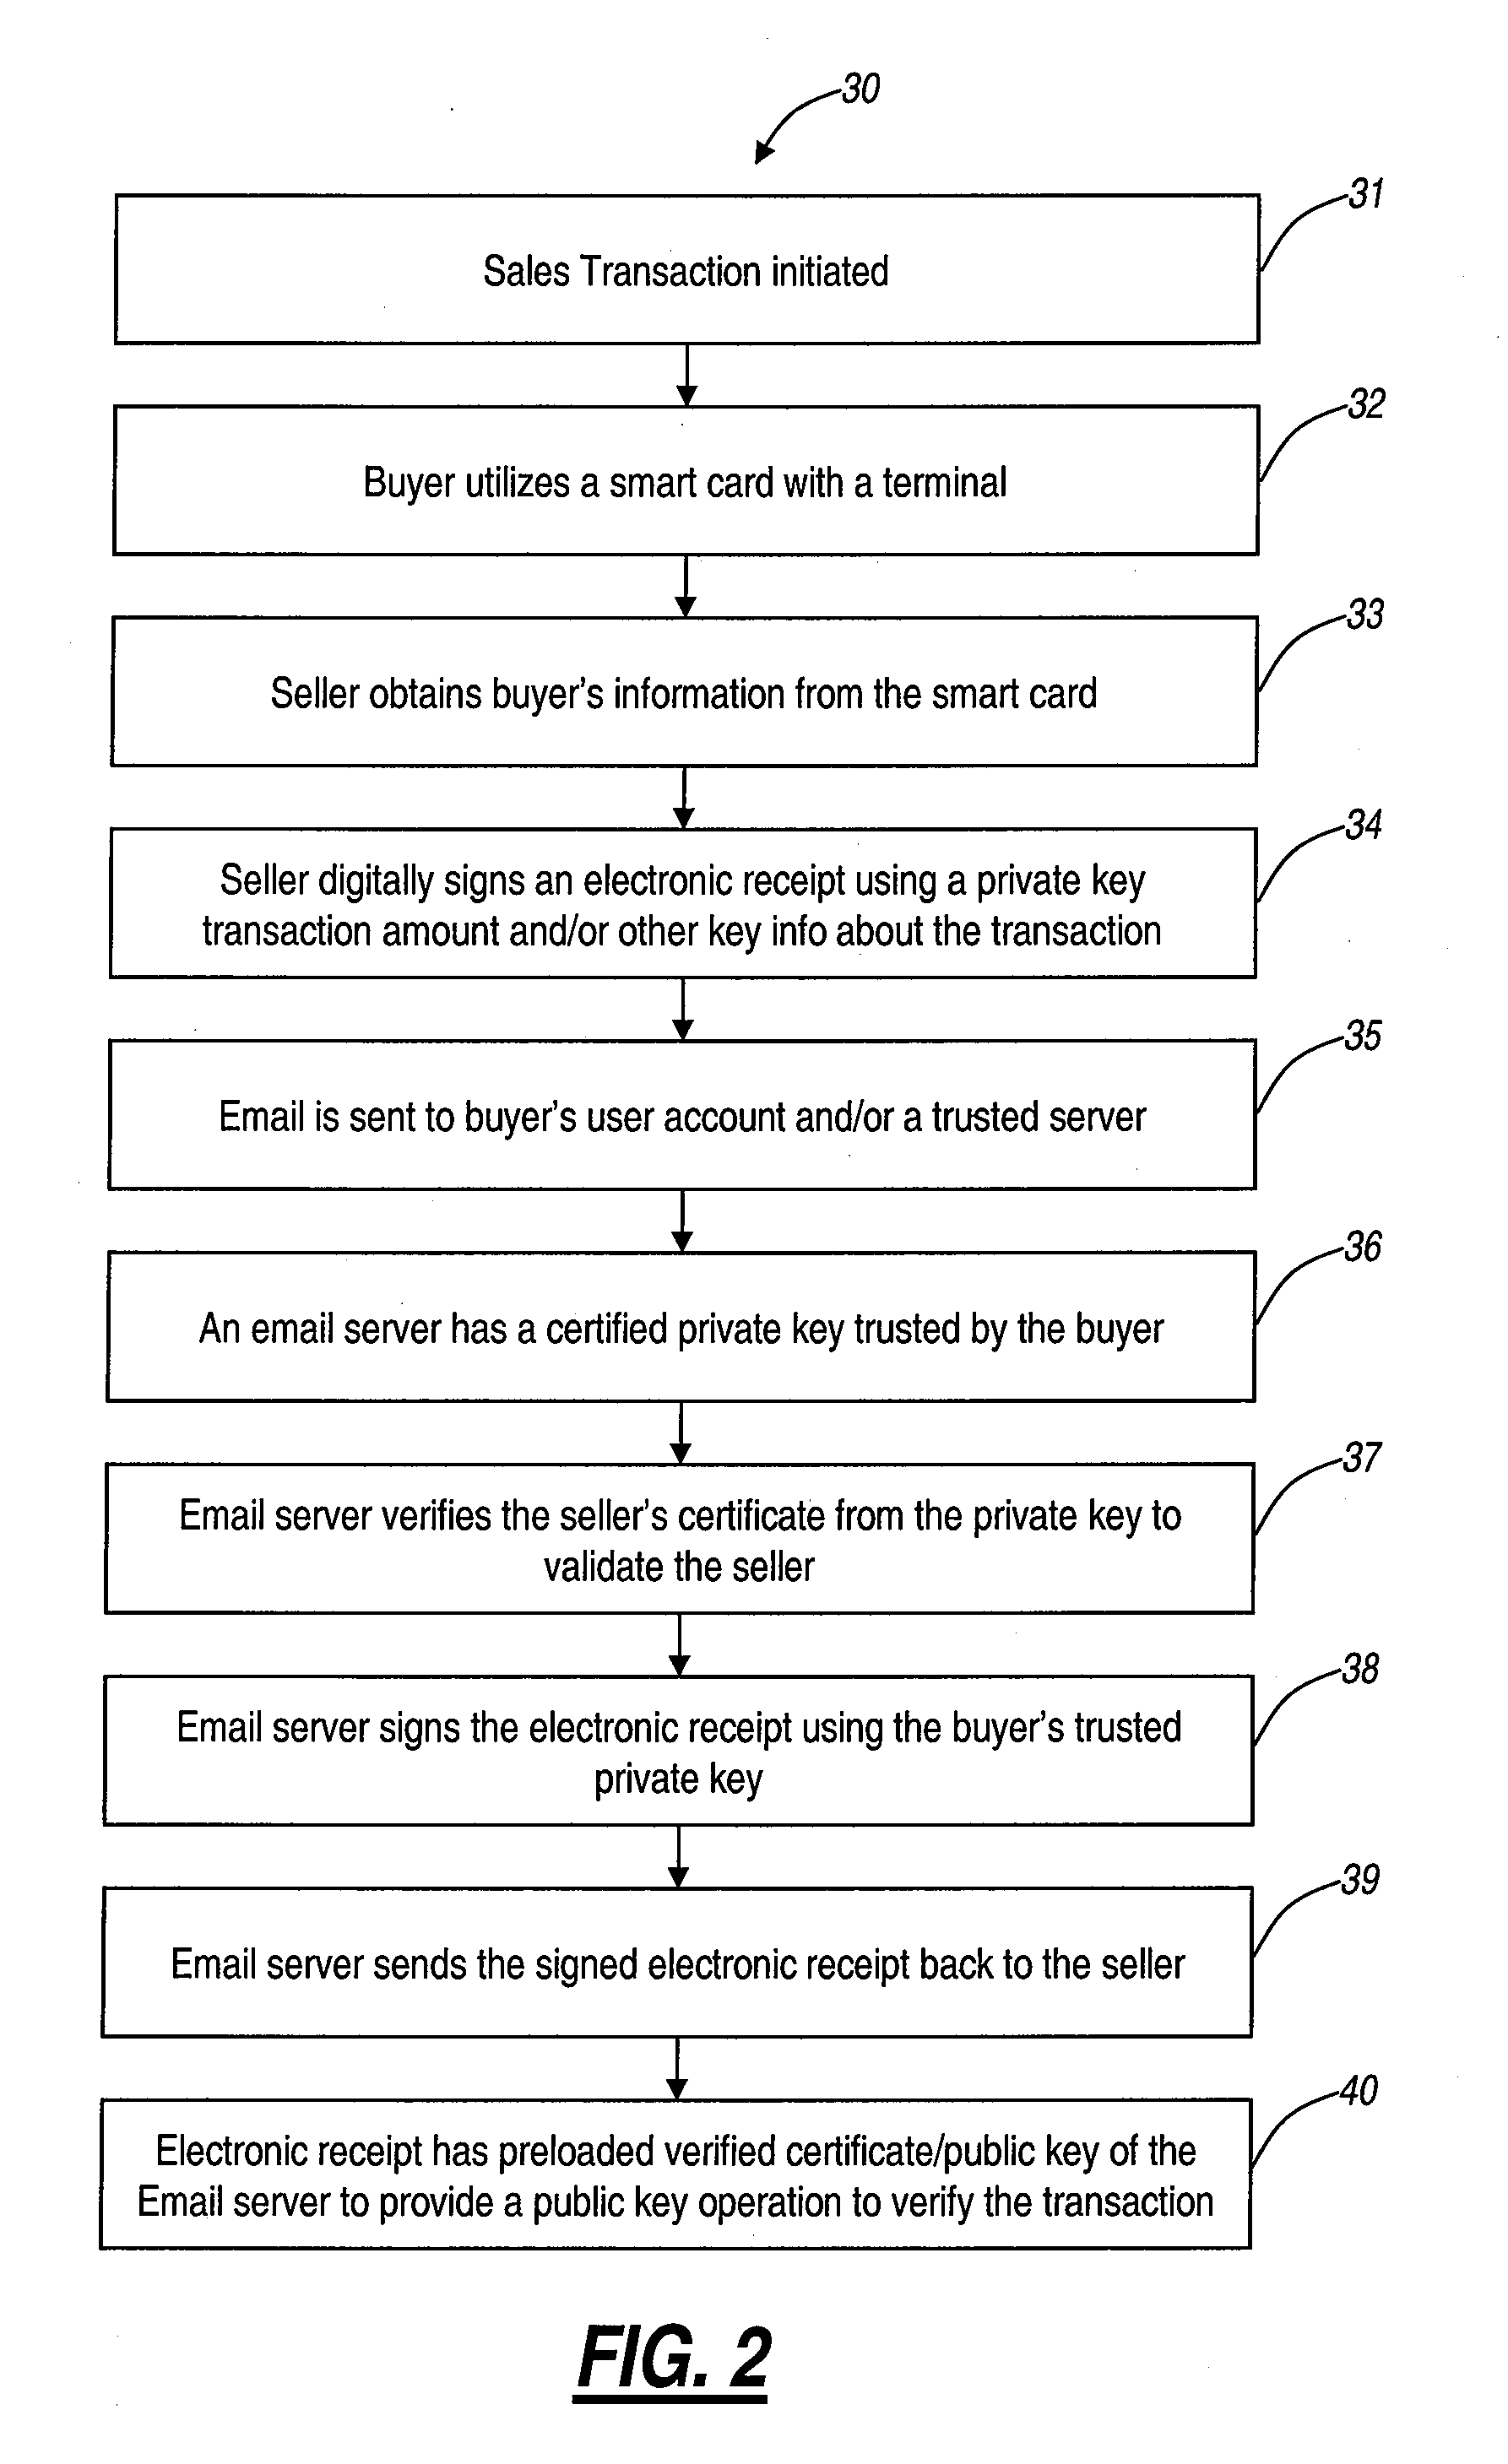 Secure electronic receipt systems and methods